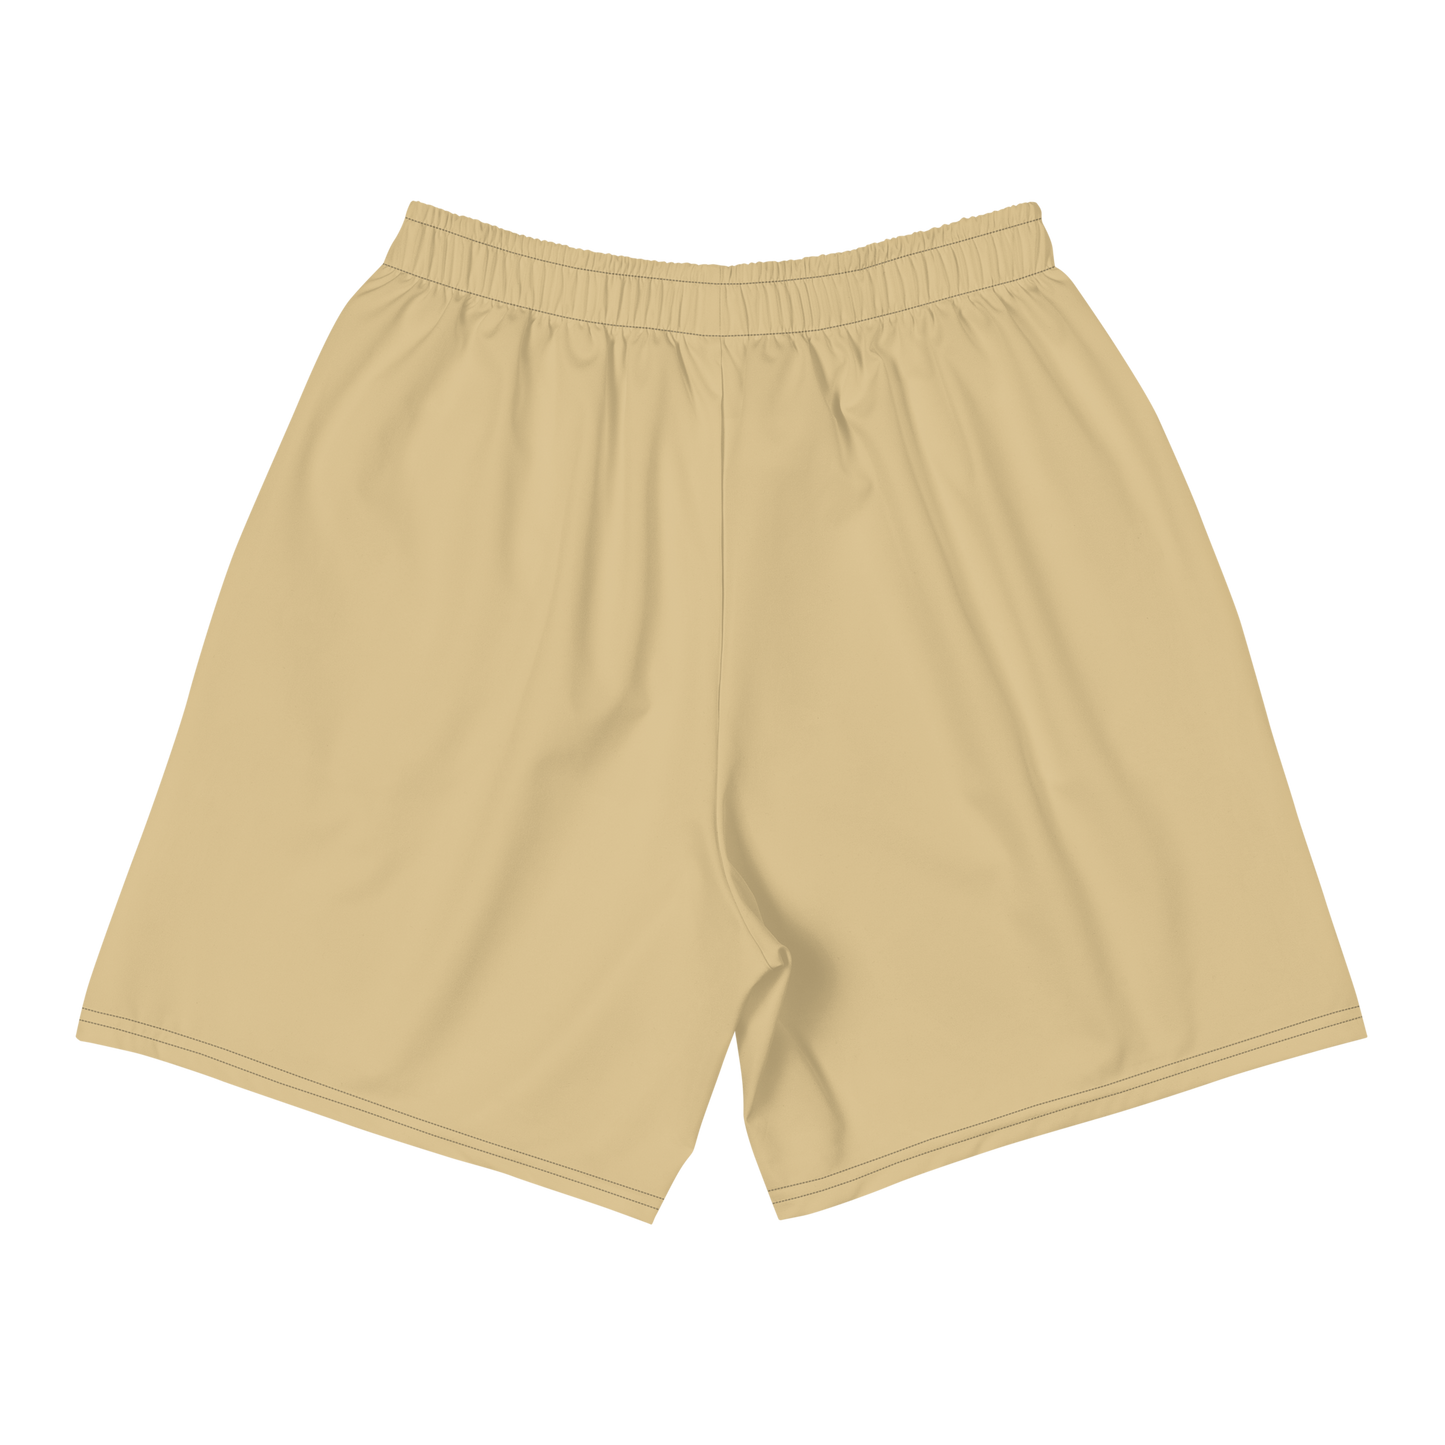 ANDREW CARR ATHLETIC SHORTS